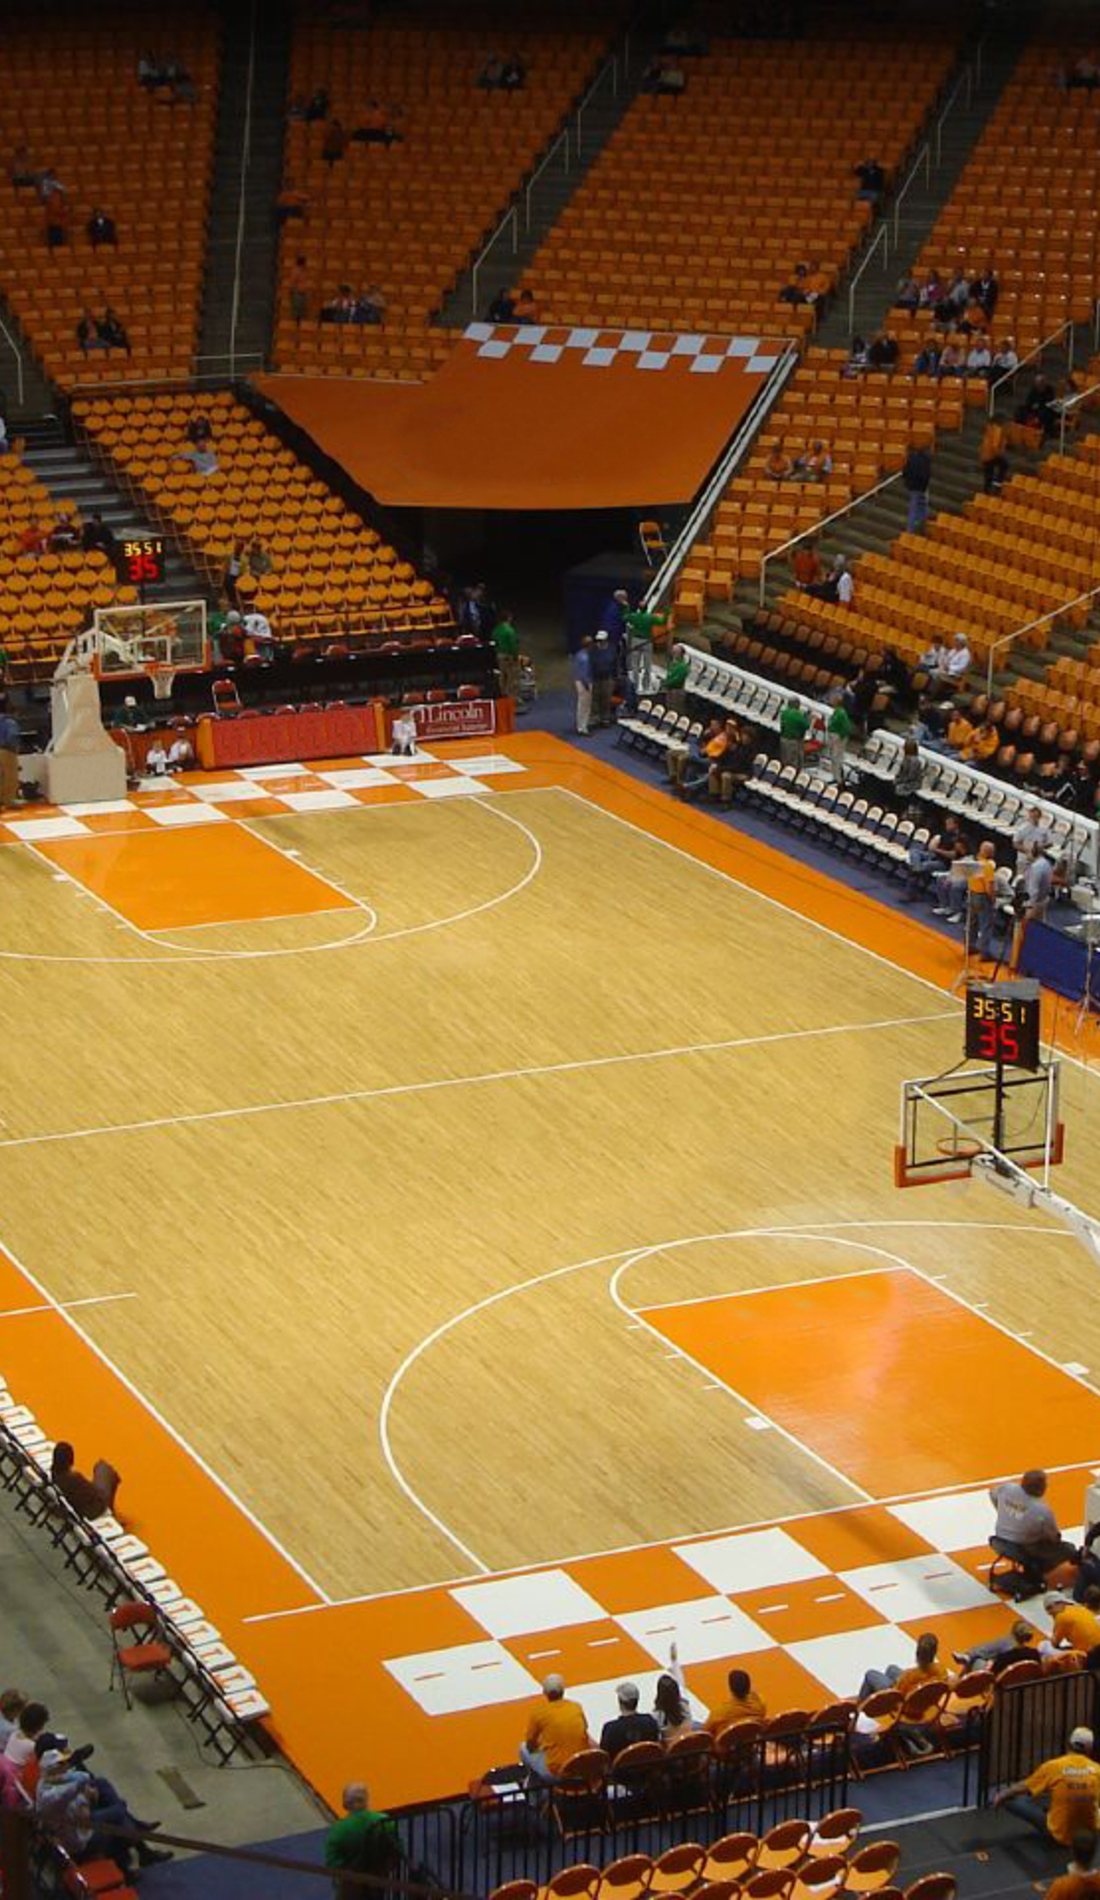 A Tennessee Volunteers Basketball live event